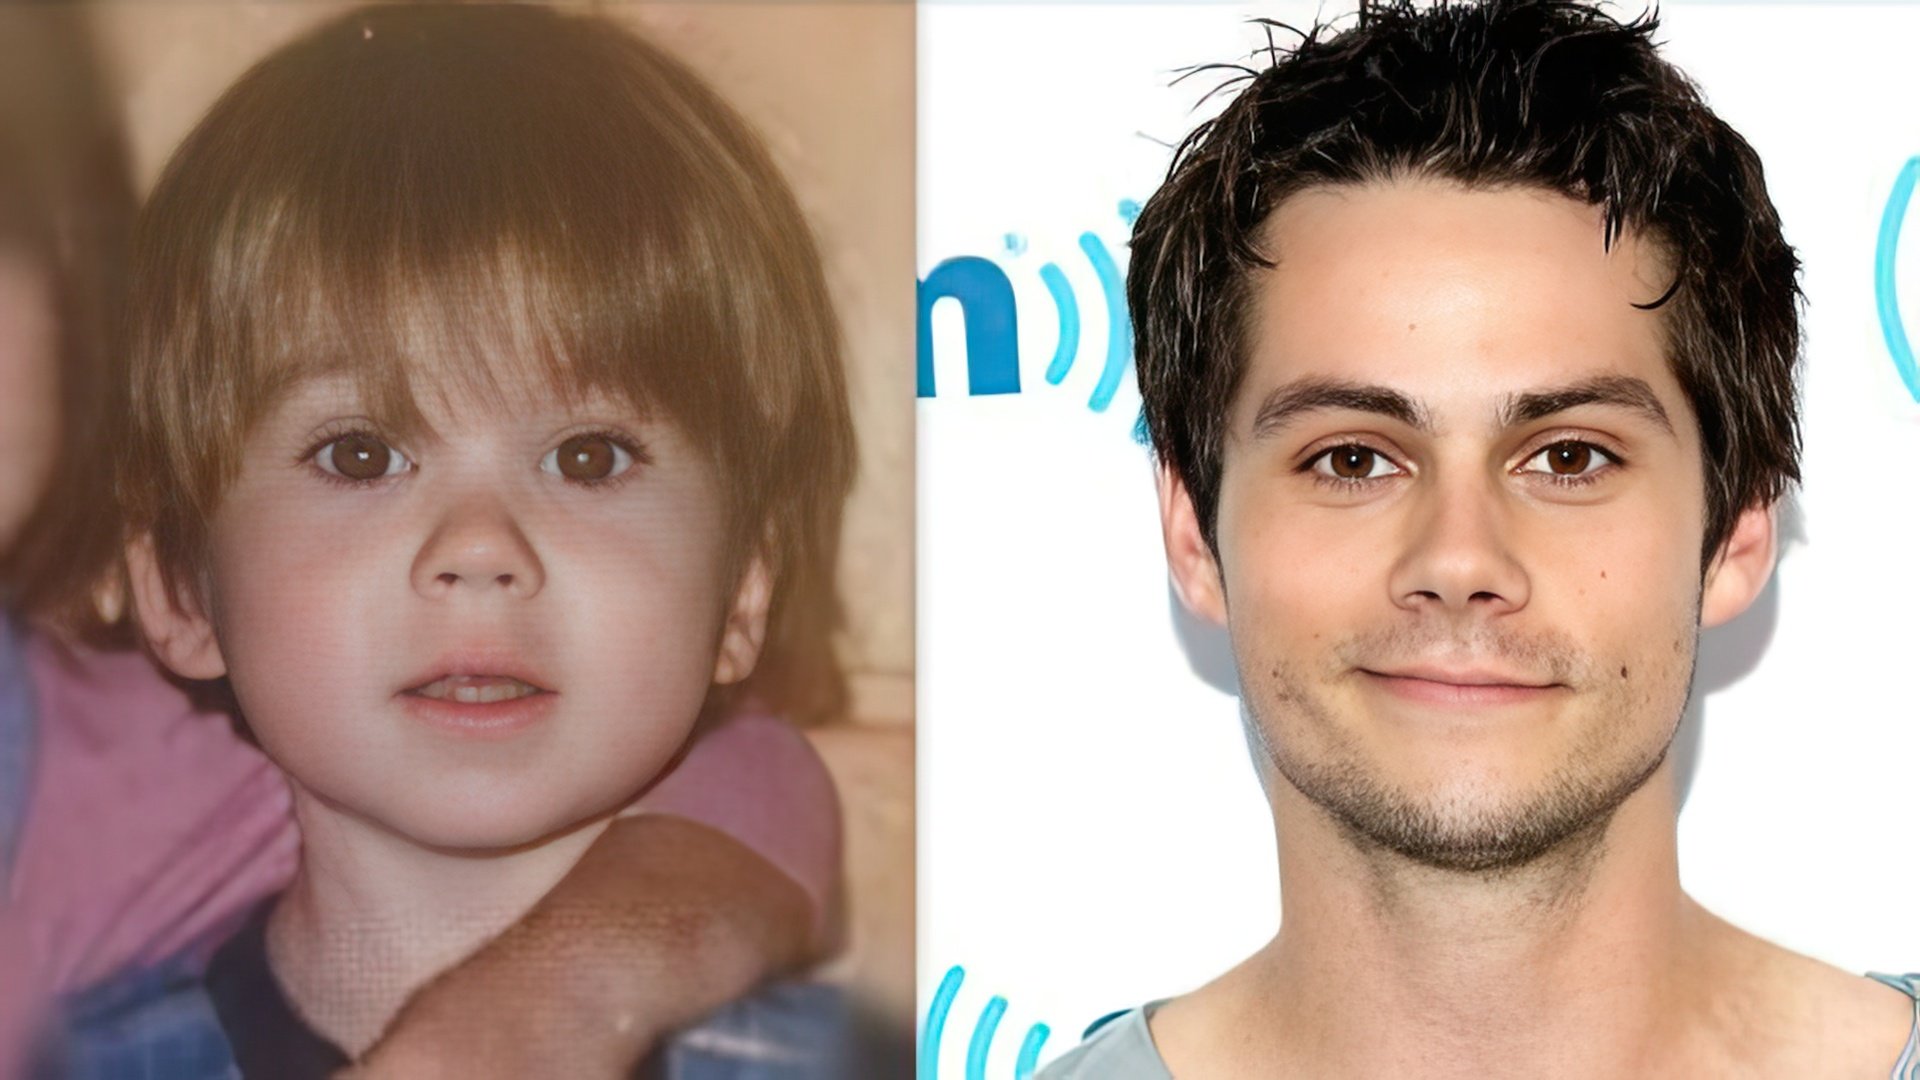 Dylan O’Brien in his childhood and now